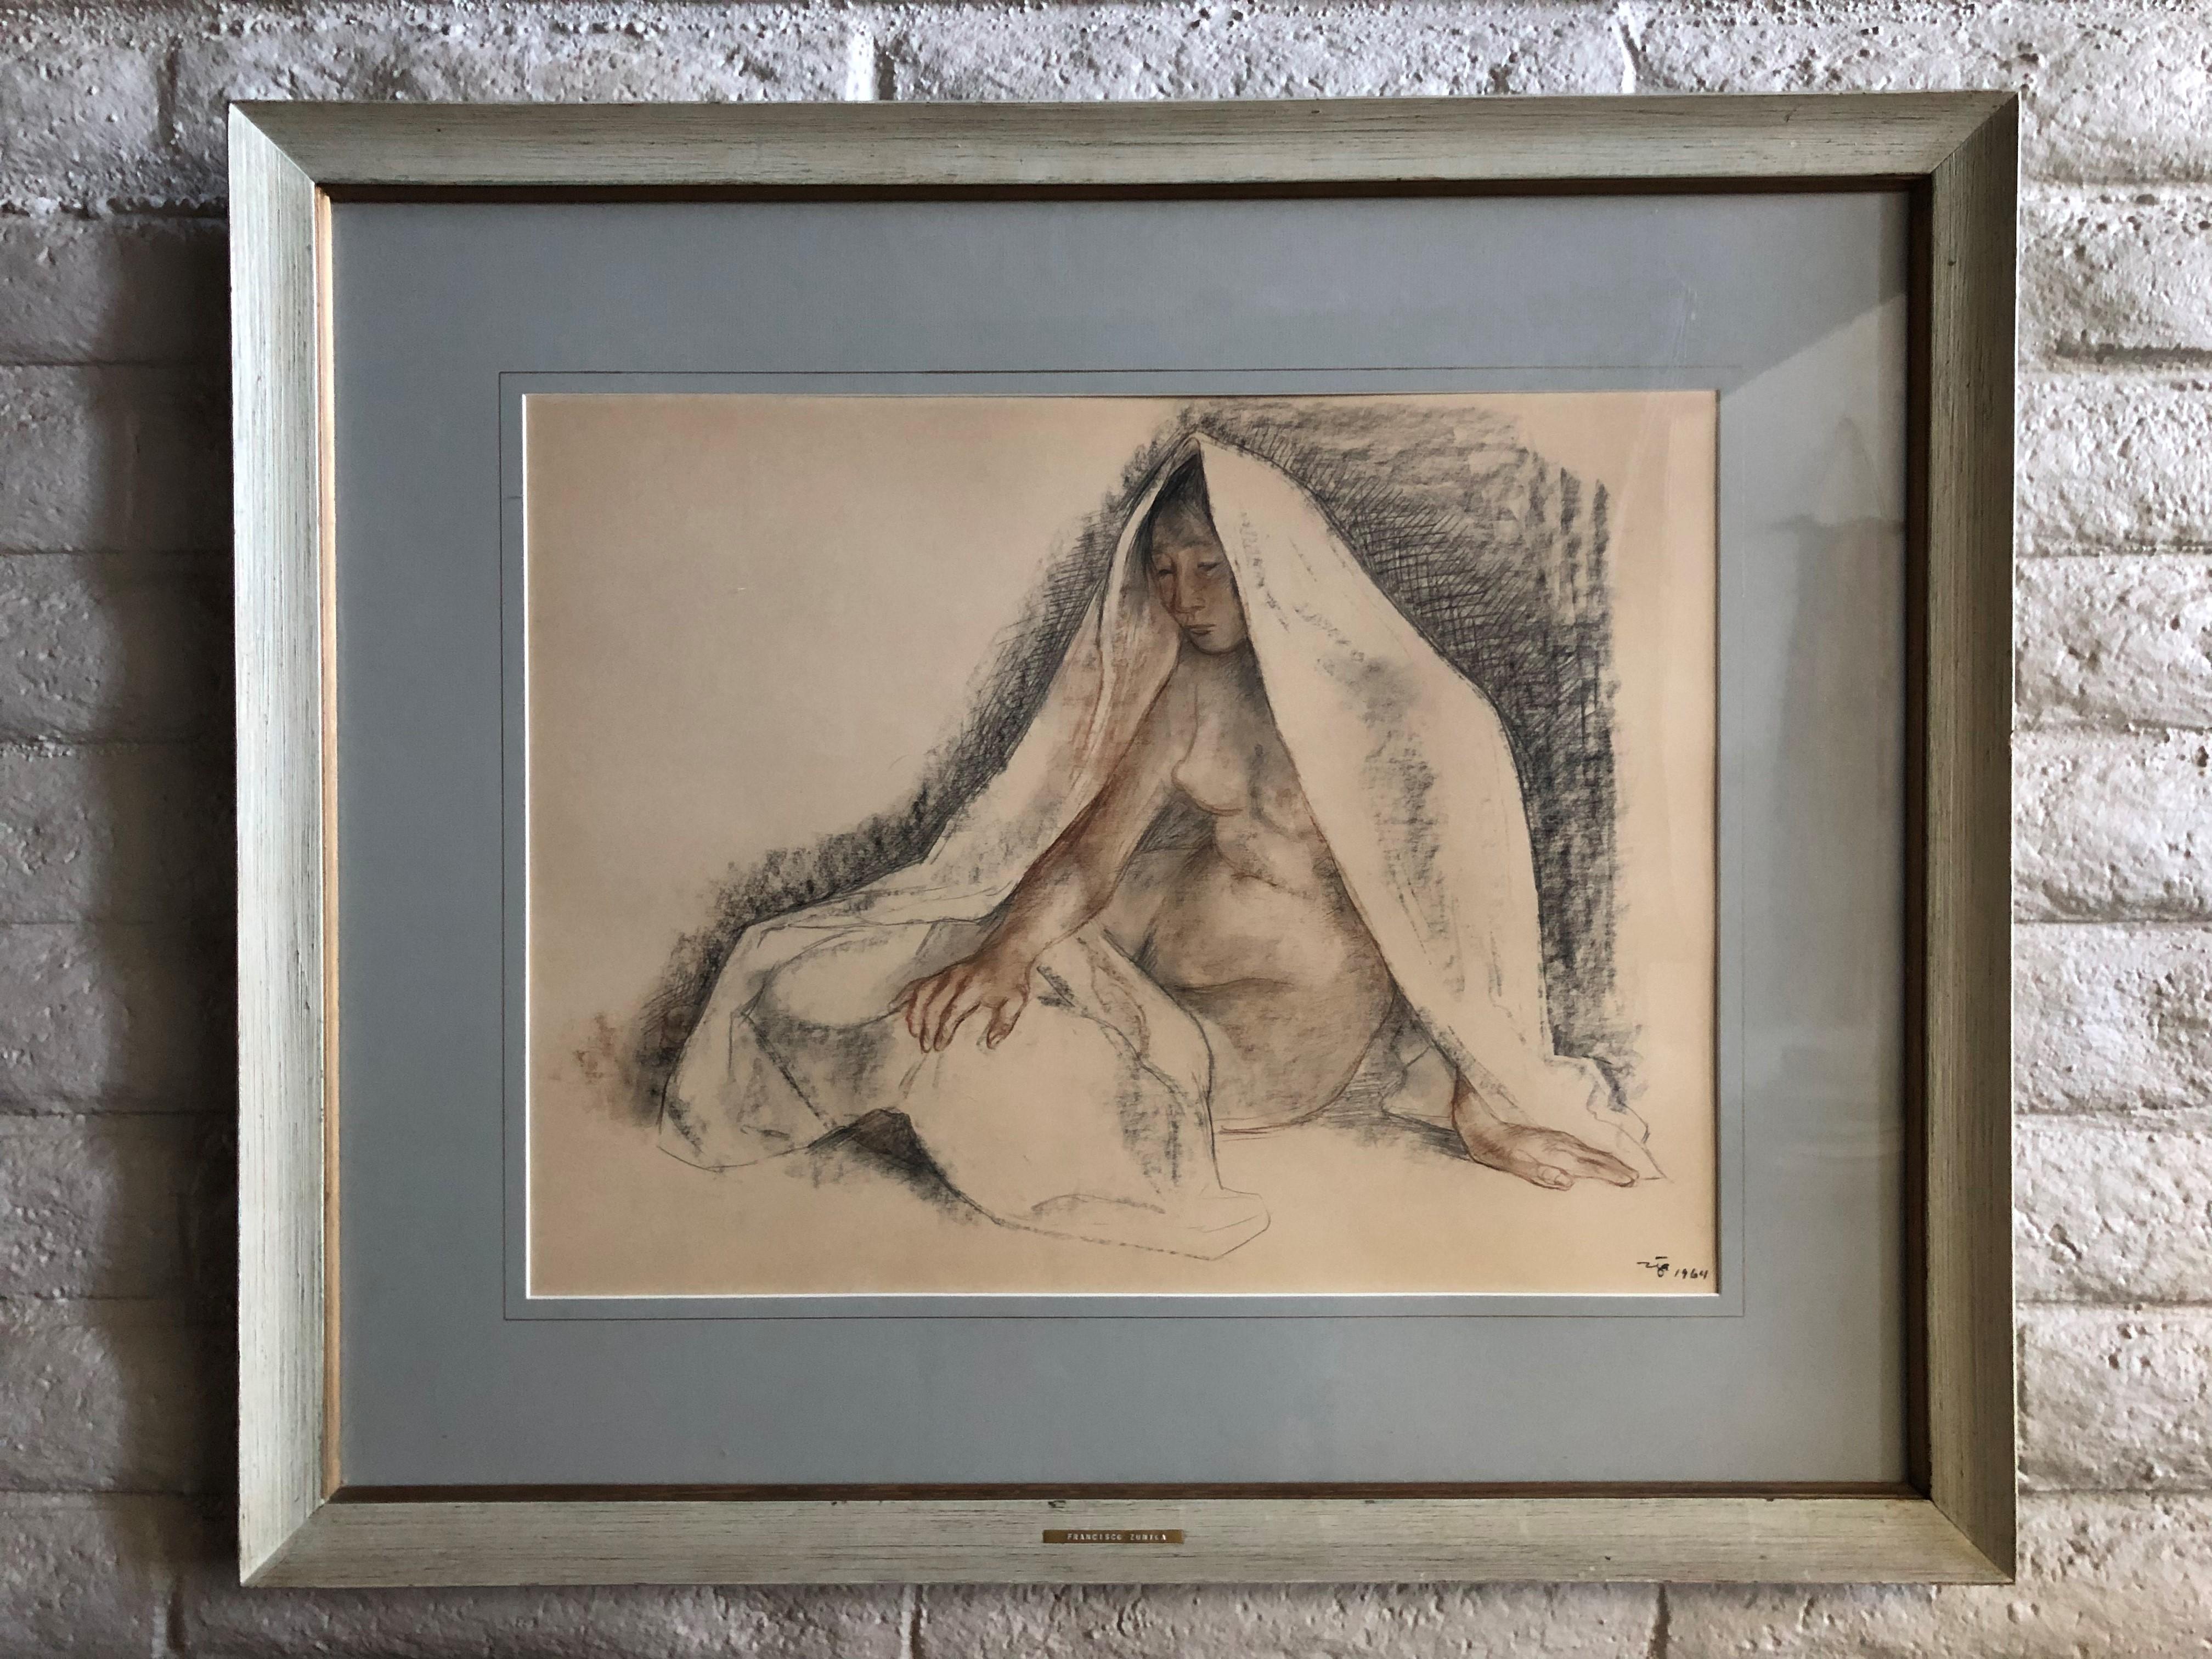 Francisco Zuniga
1964
Signed
Charcoal and pastel on paper
Signed and dated lower right
Paper size: approx 24.75